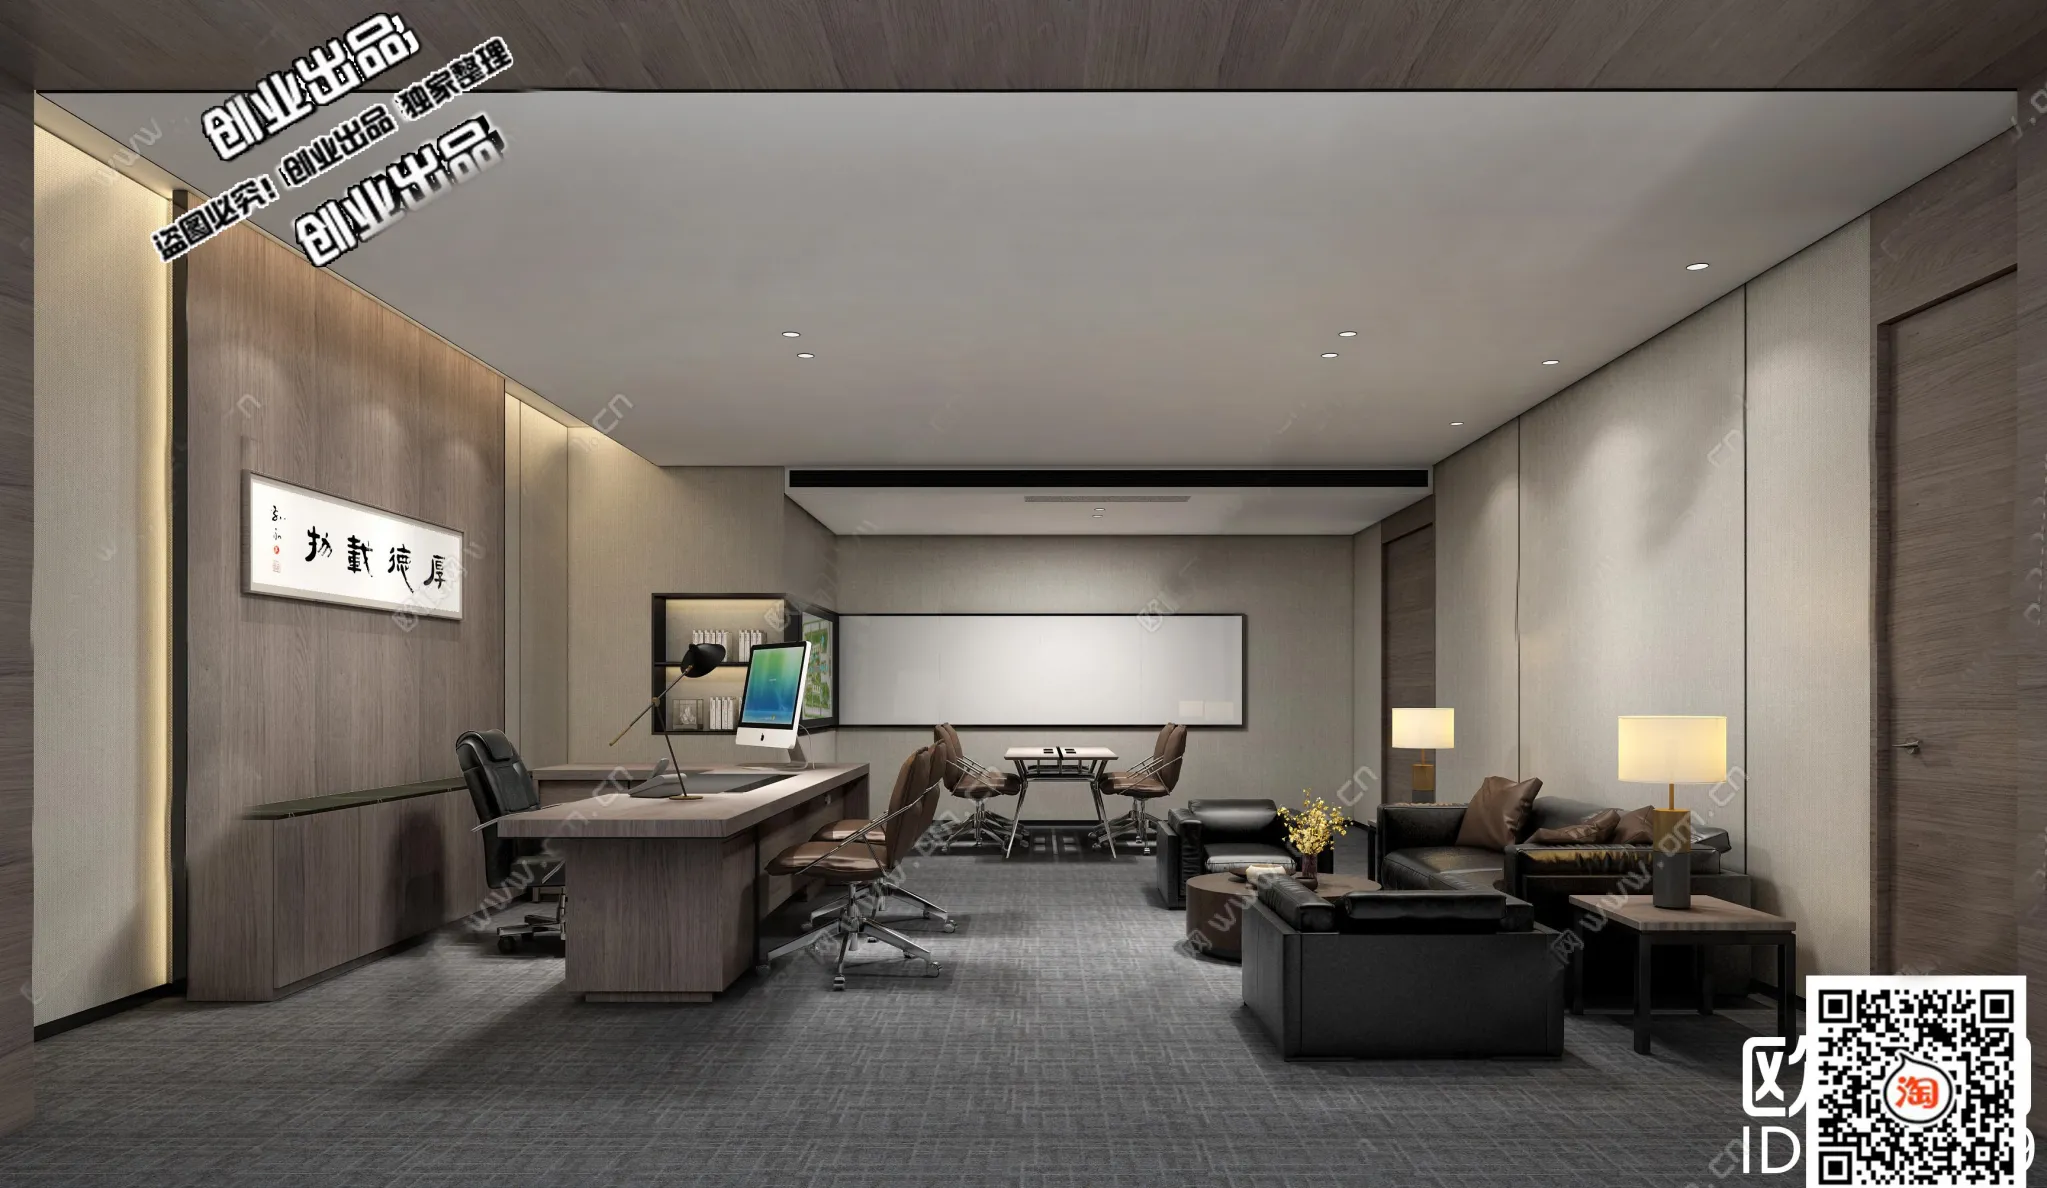 3D OFFICE INTERIOR (VRAY) – MANAGER ROOM 3D SCENES – 136